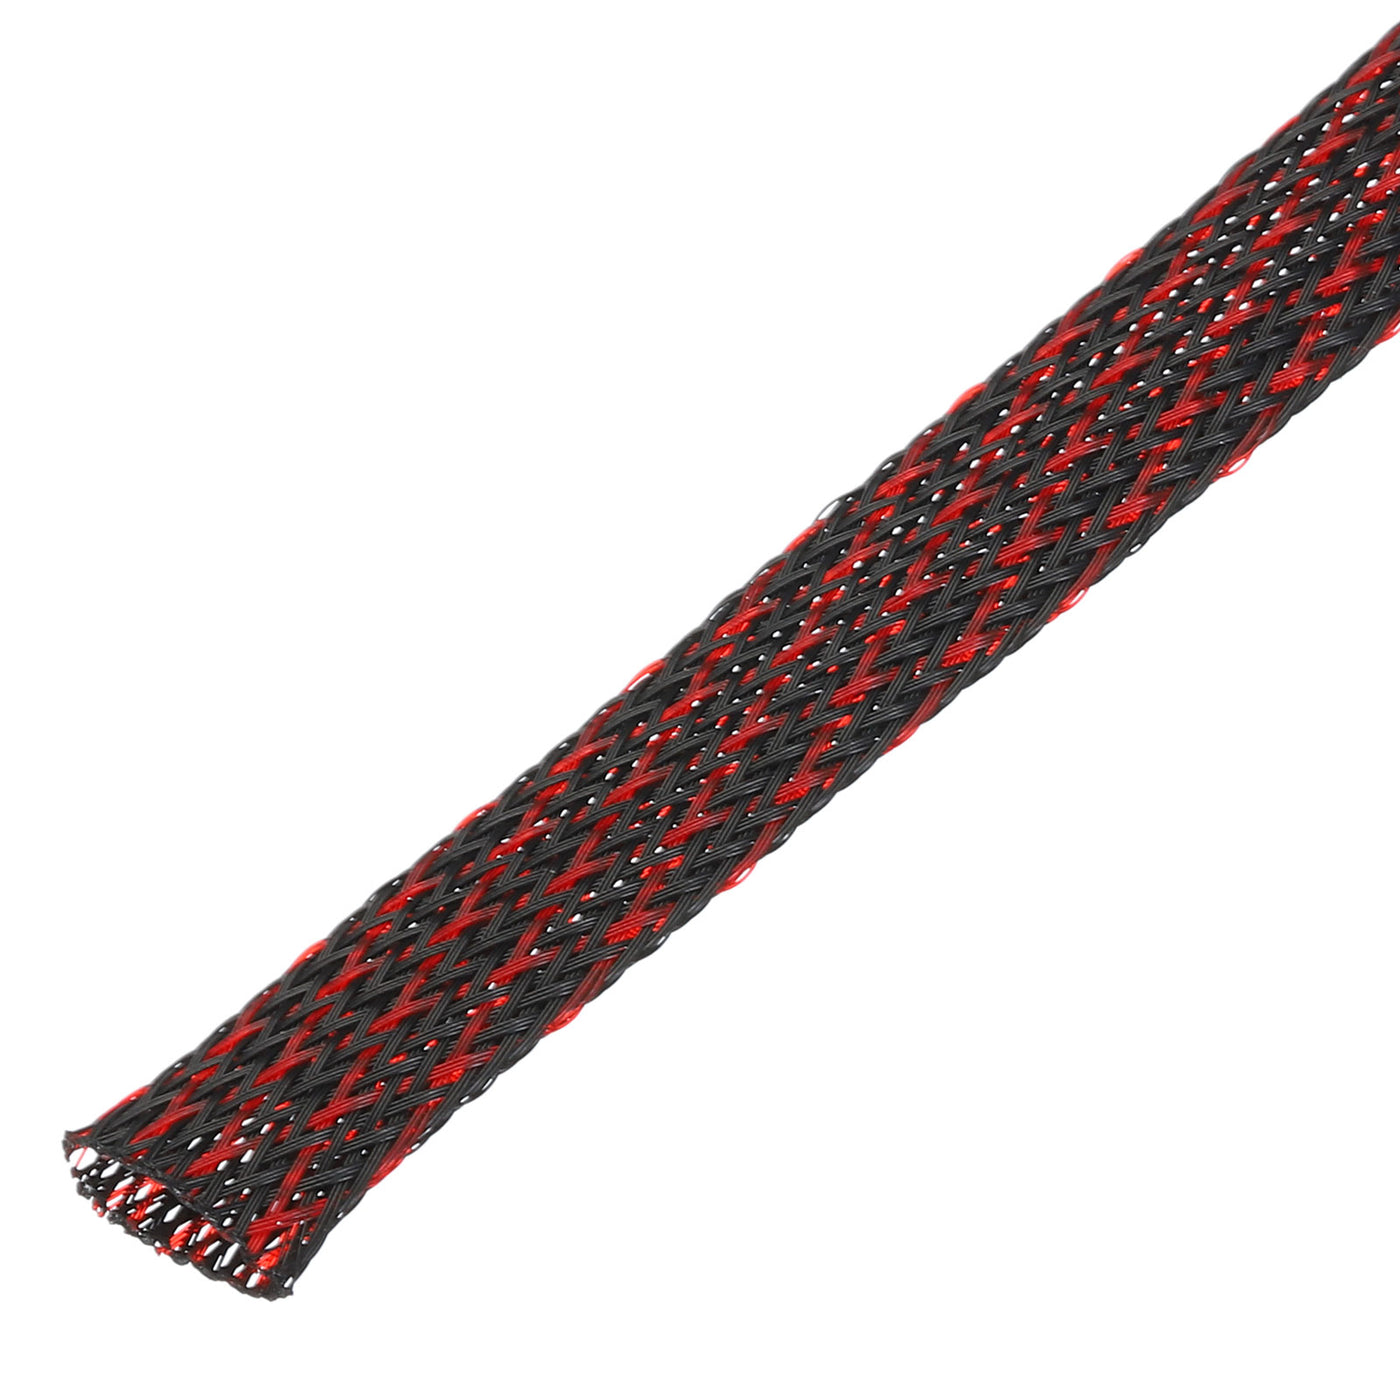 uxcell Uxcell Insulation Braid Sleeving, 16.4 Ft-12mm High Temperature Sleeve Black Red